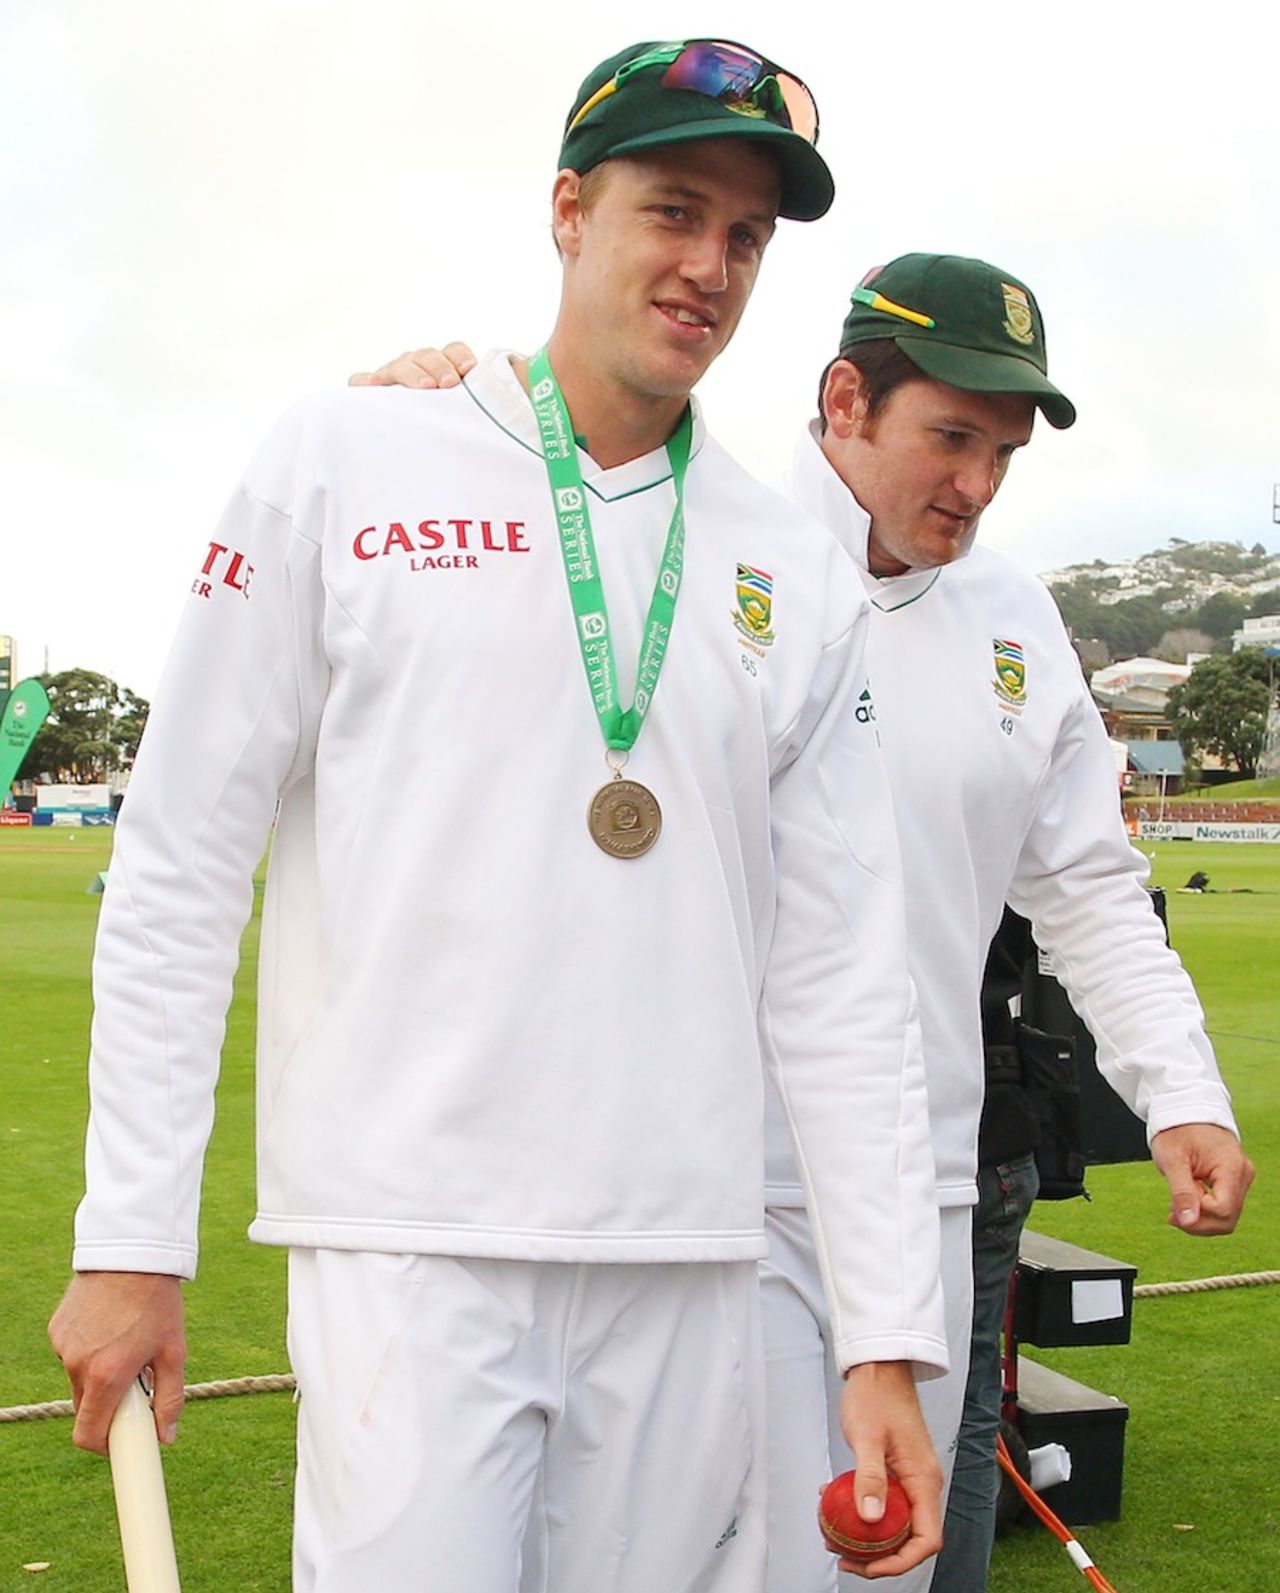 Morne Morkel was Man of the Match for his 6 for 23, New Zealand v South Africa, 3rd Test, Wellington, 5th day, March 27, 2012